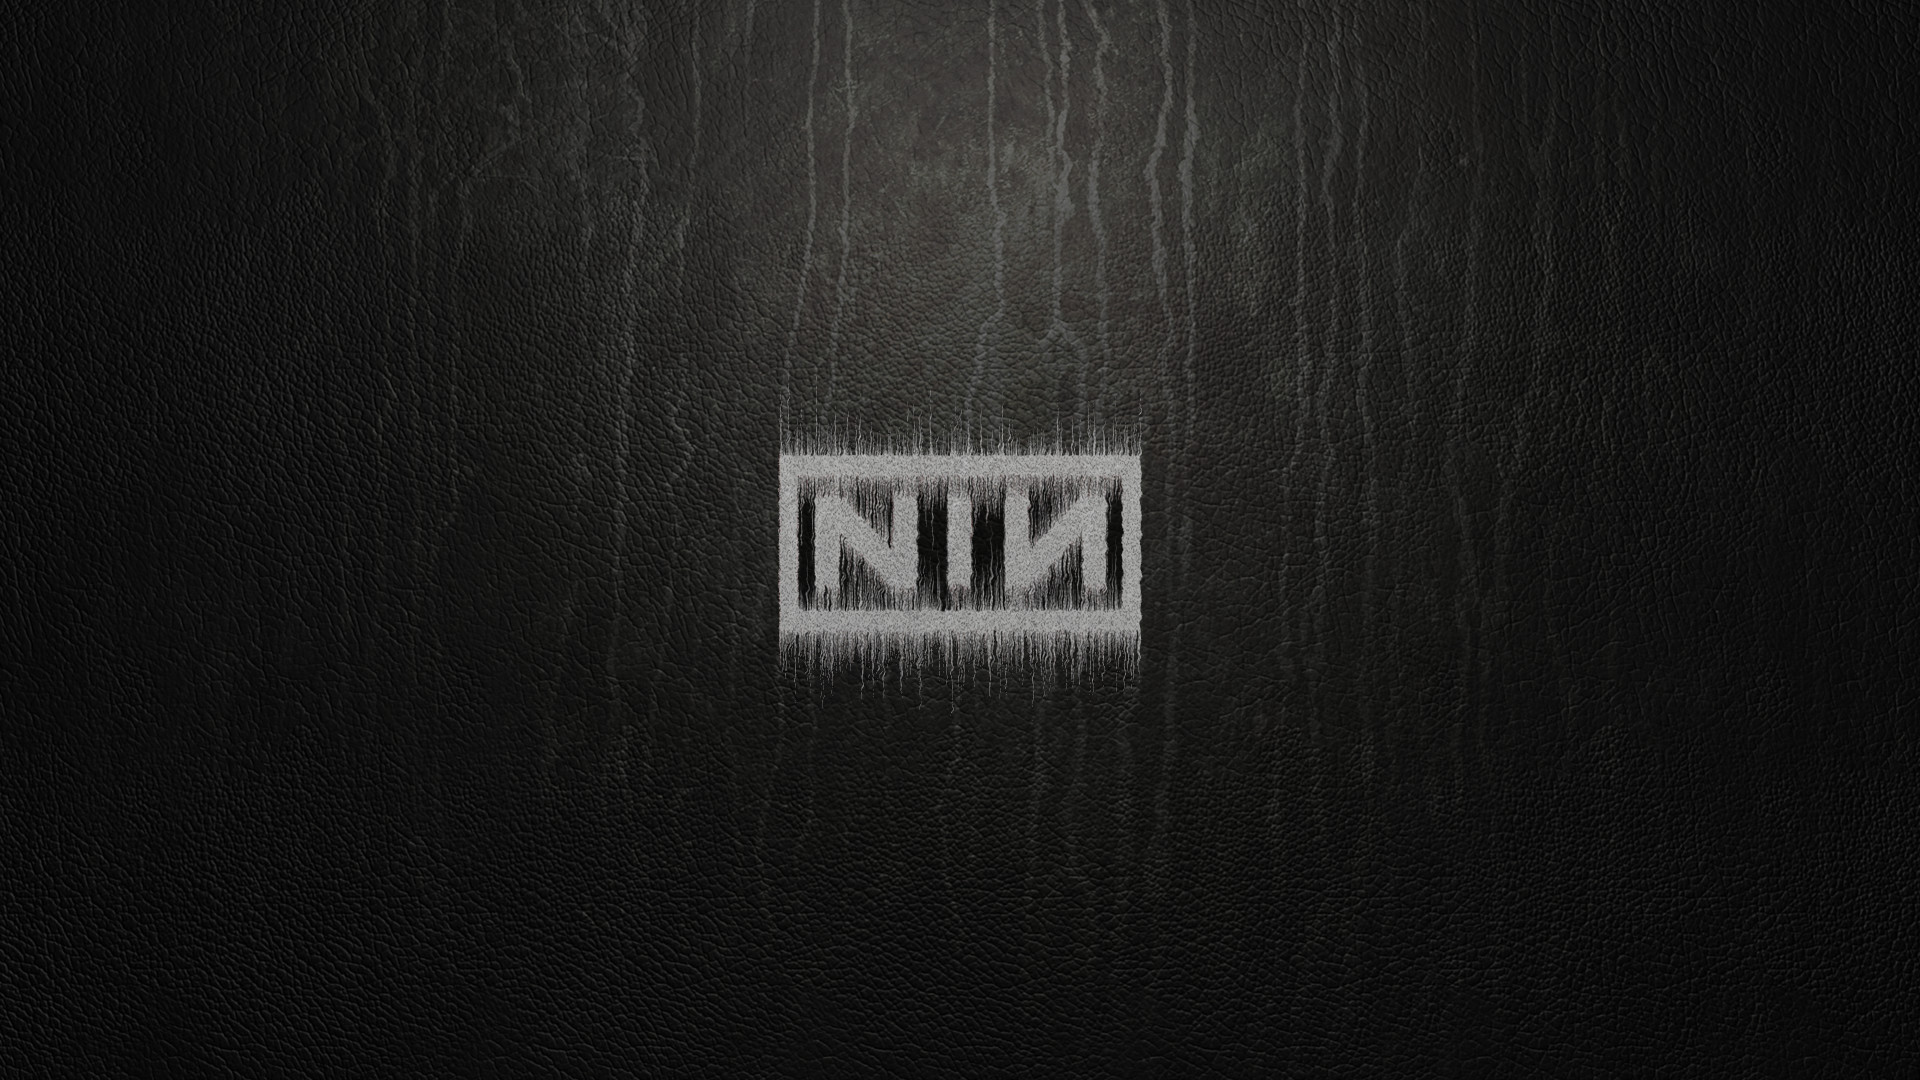 1920x1080 exceptional nine inch nails art 20 further inspiration article